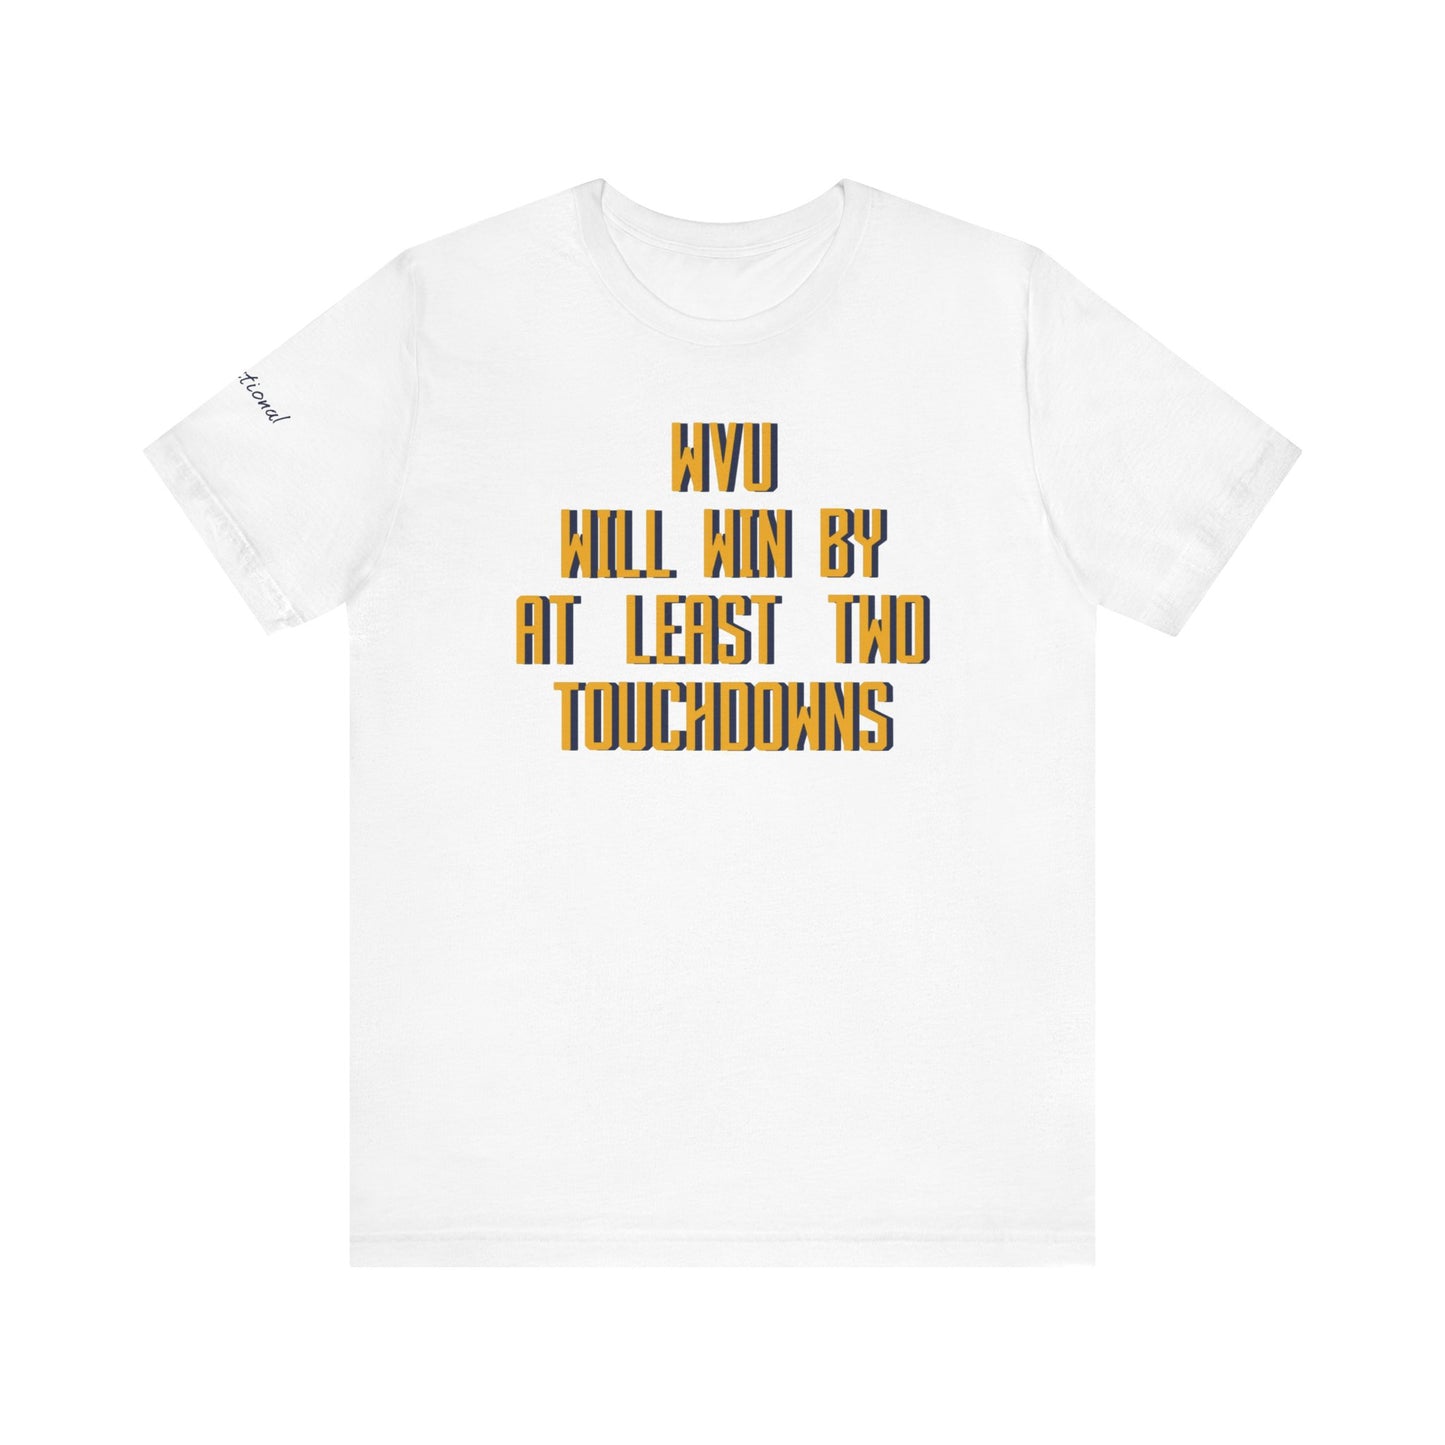 Two Touchdowns Tee